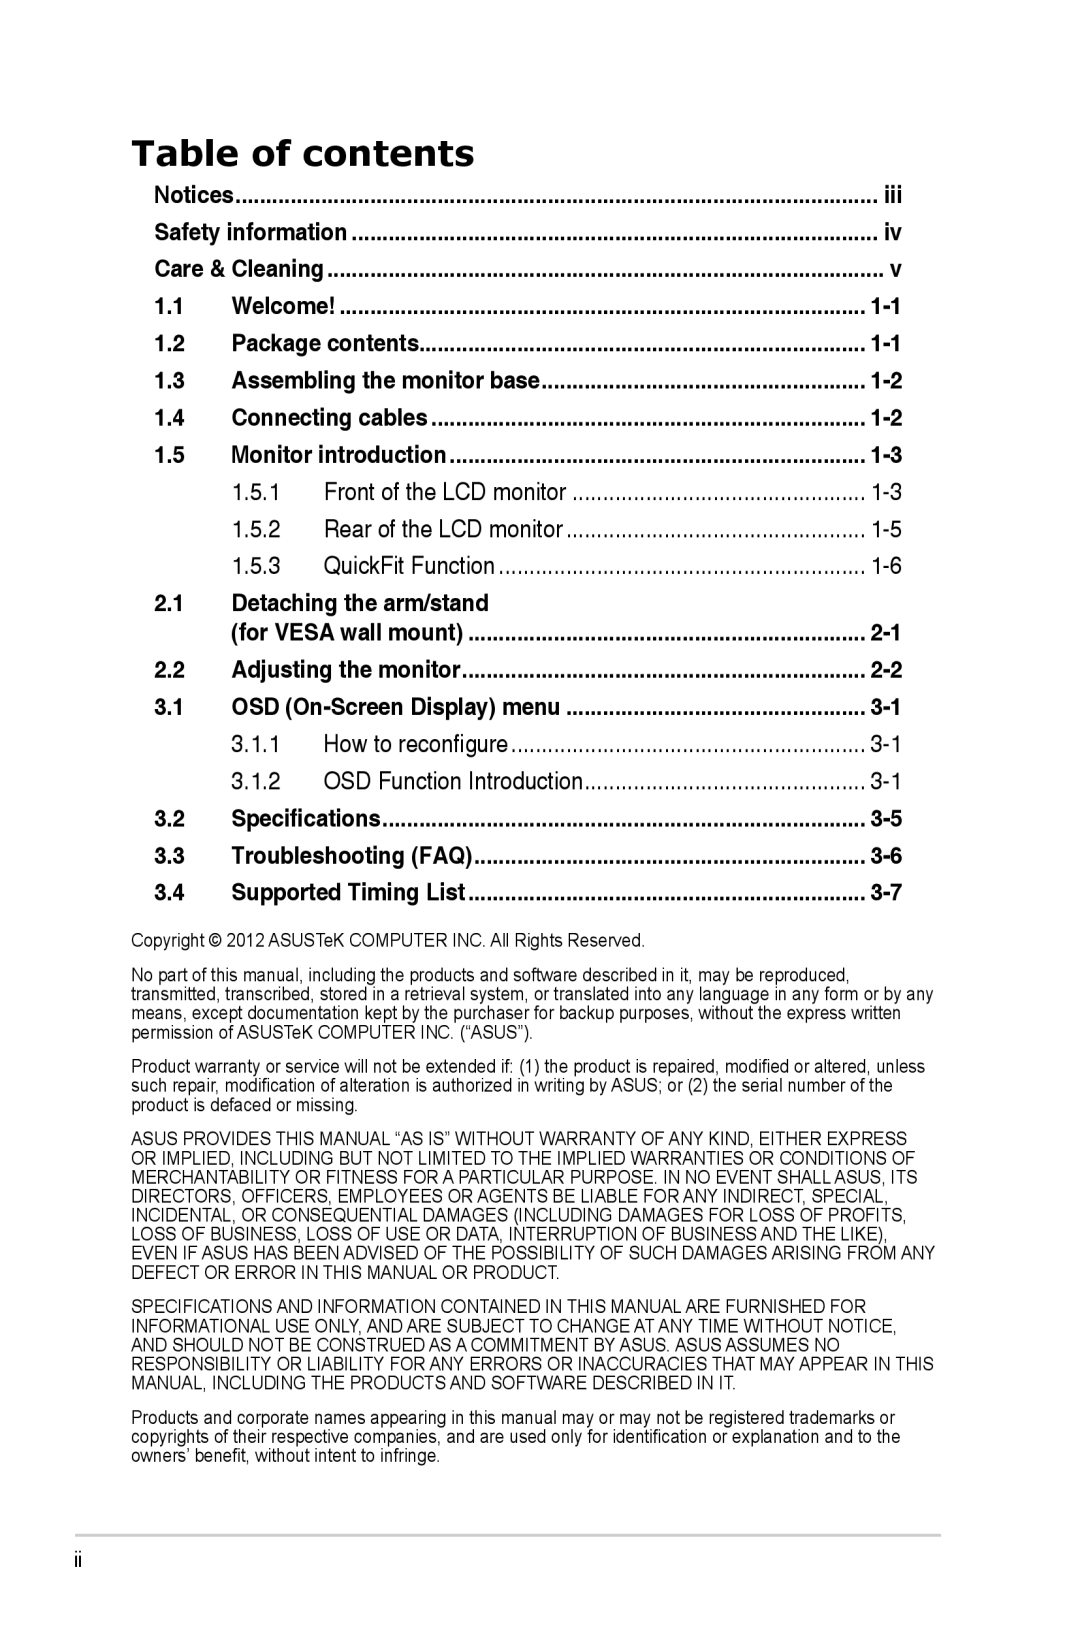 Asus VS207TP manual Table of contents, 1.5.1, 1.5.2, 1.5.3, Detaching the arm/stand, 3.1.1, 3.1.2 